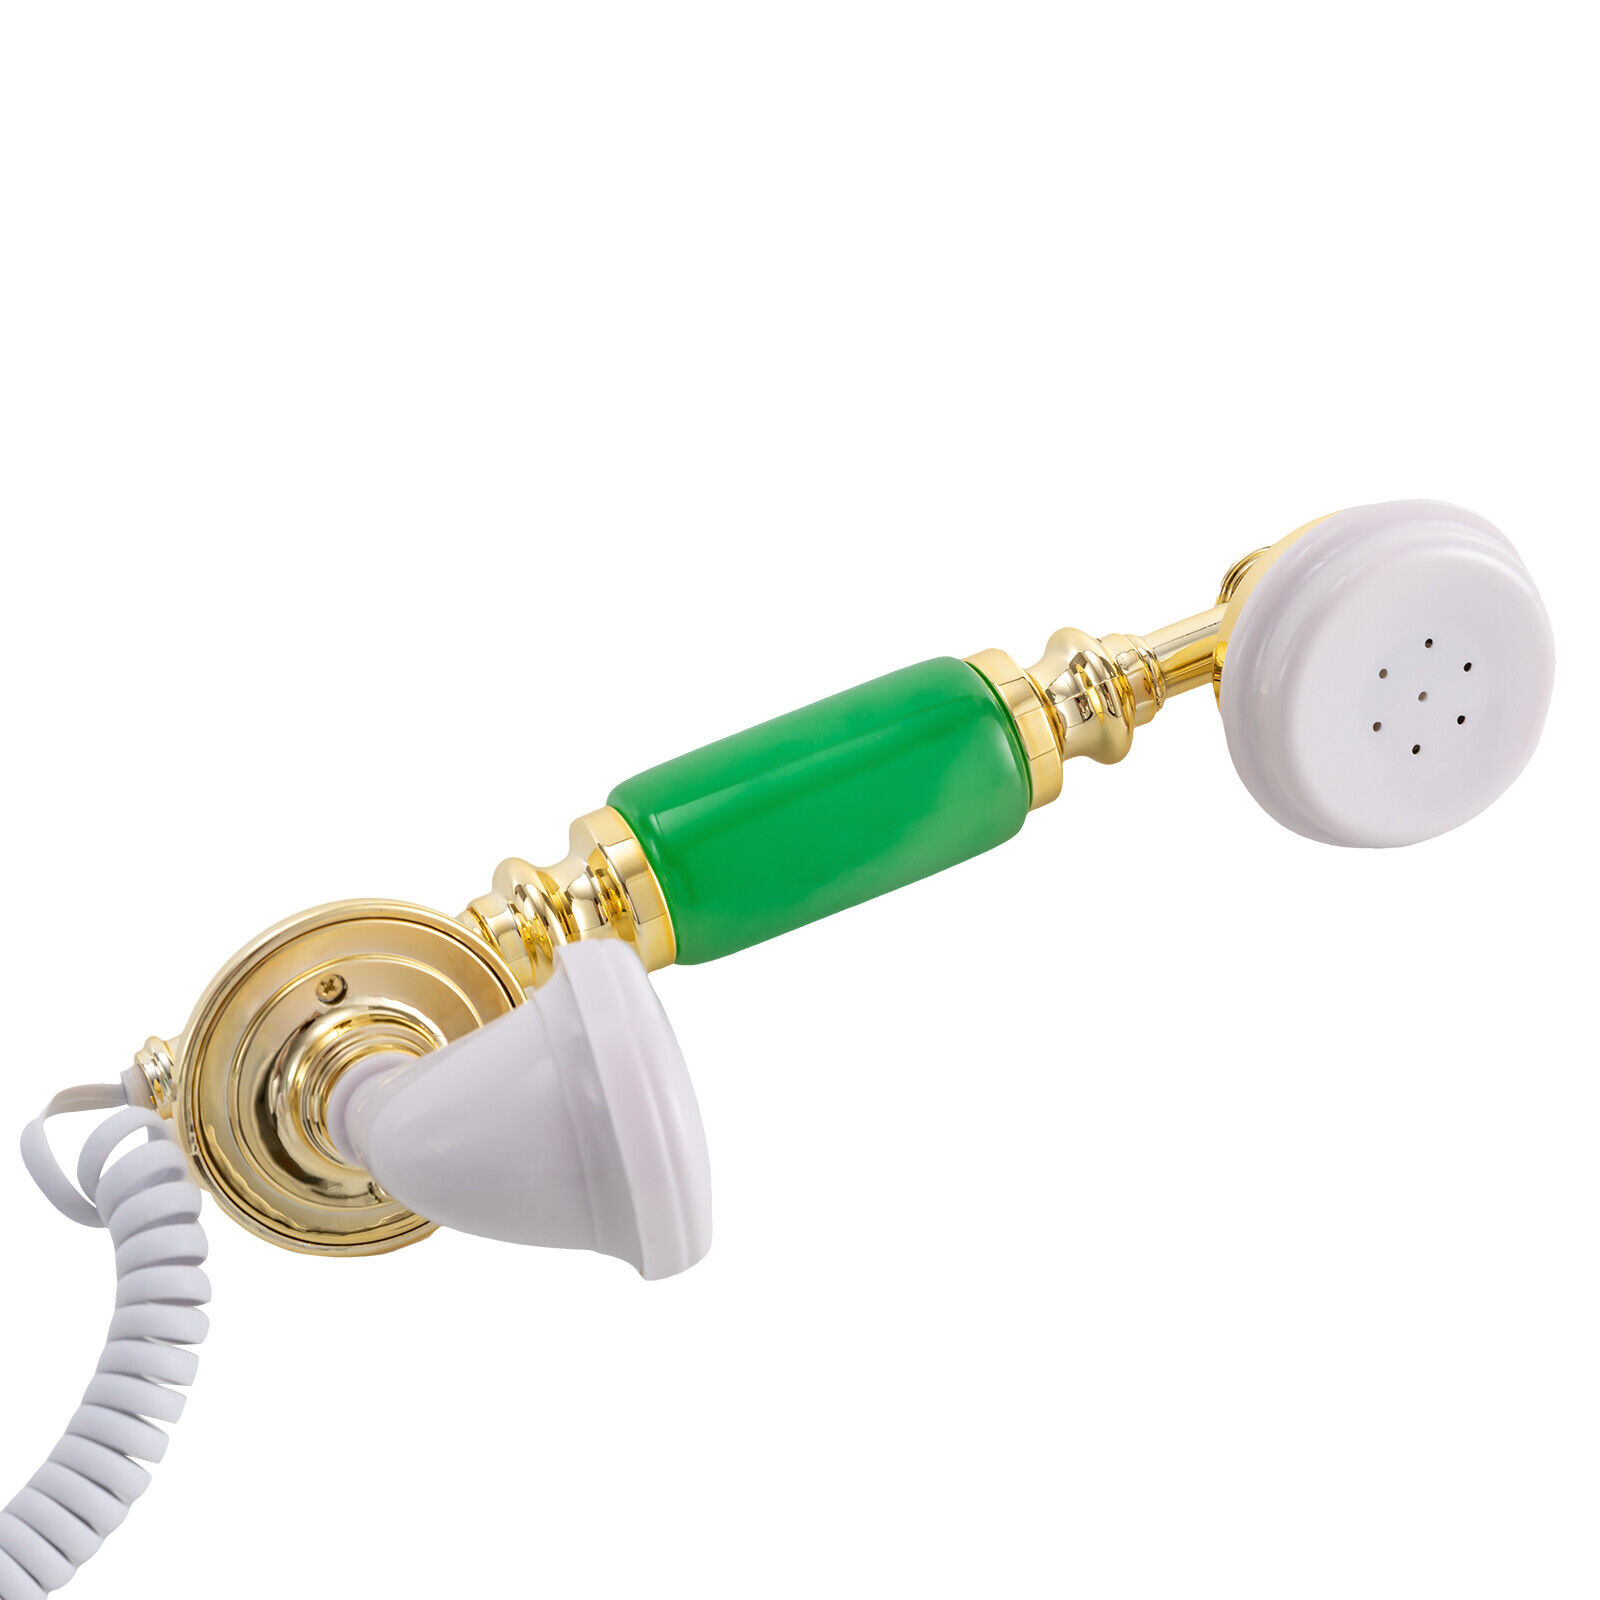 Retro Horse Design Telephone Dial Corded Phone Exquisite Workmanship Green Unbranded Does not apply - фотография #18